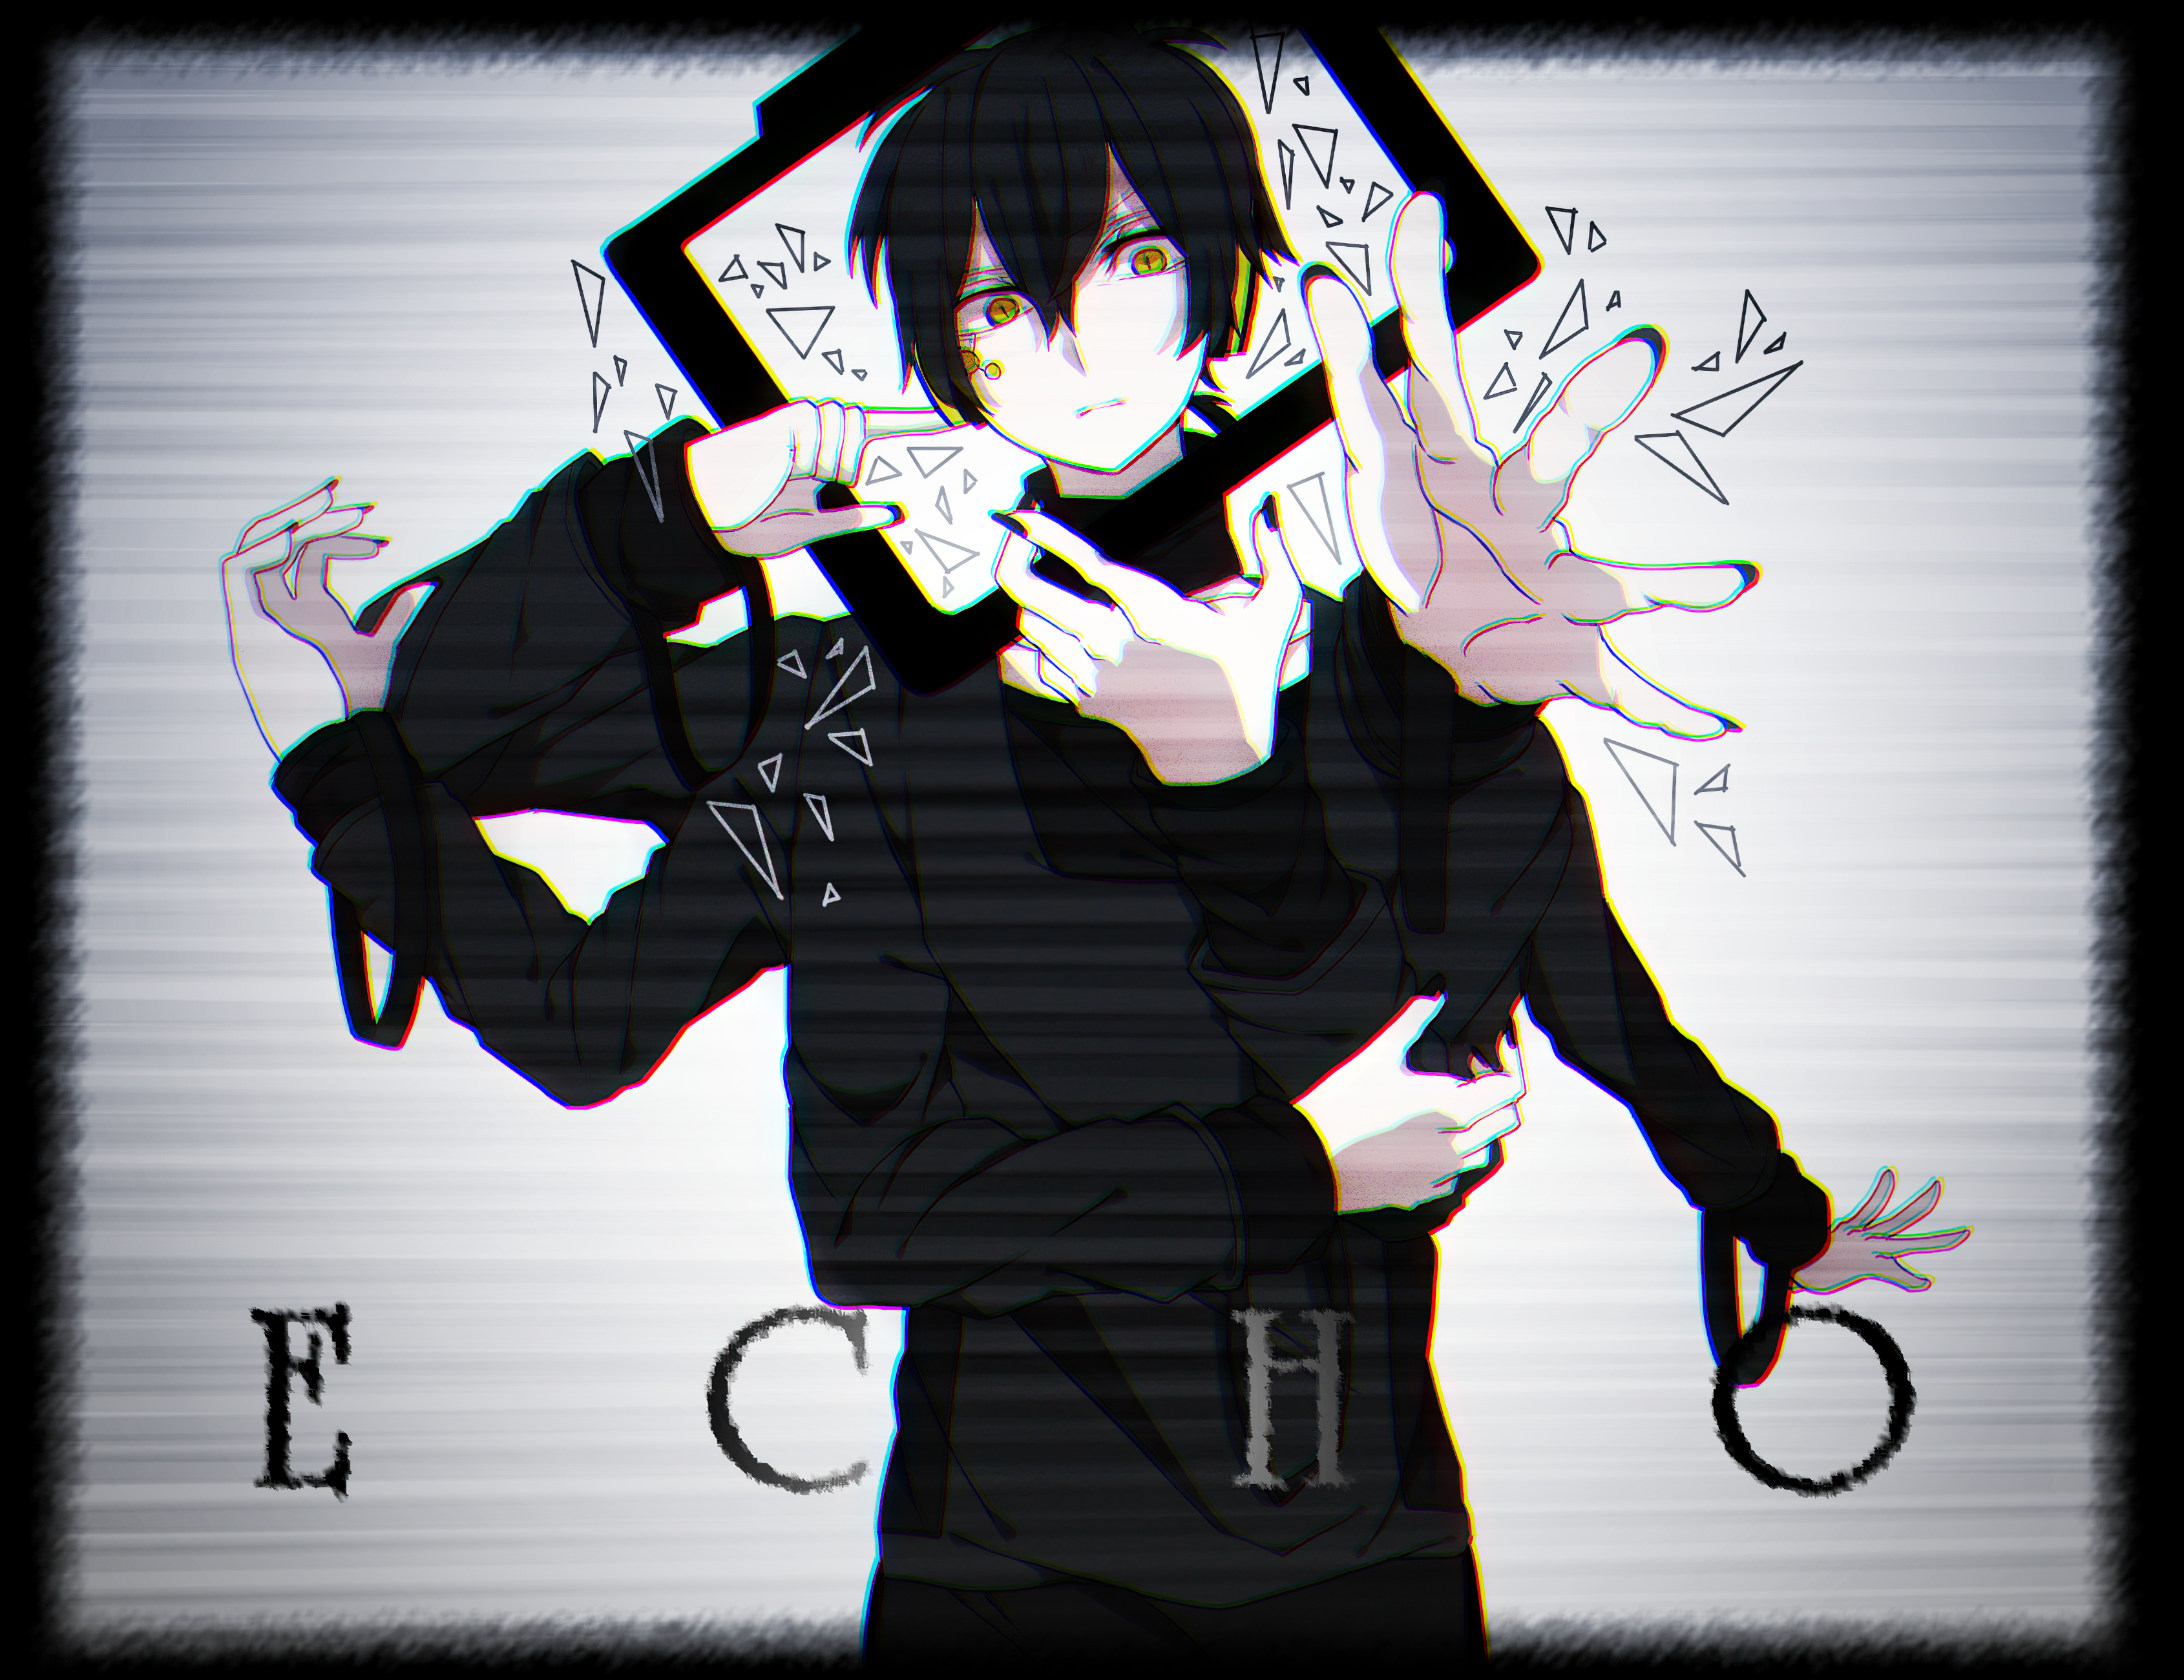 Anime Kagerou Project HD Wallpaper by はきゅ